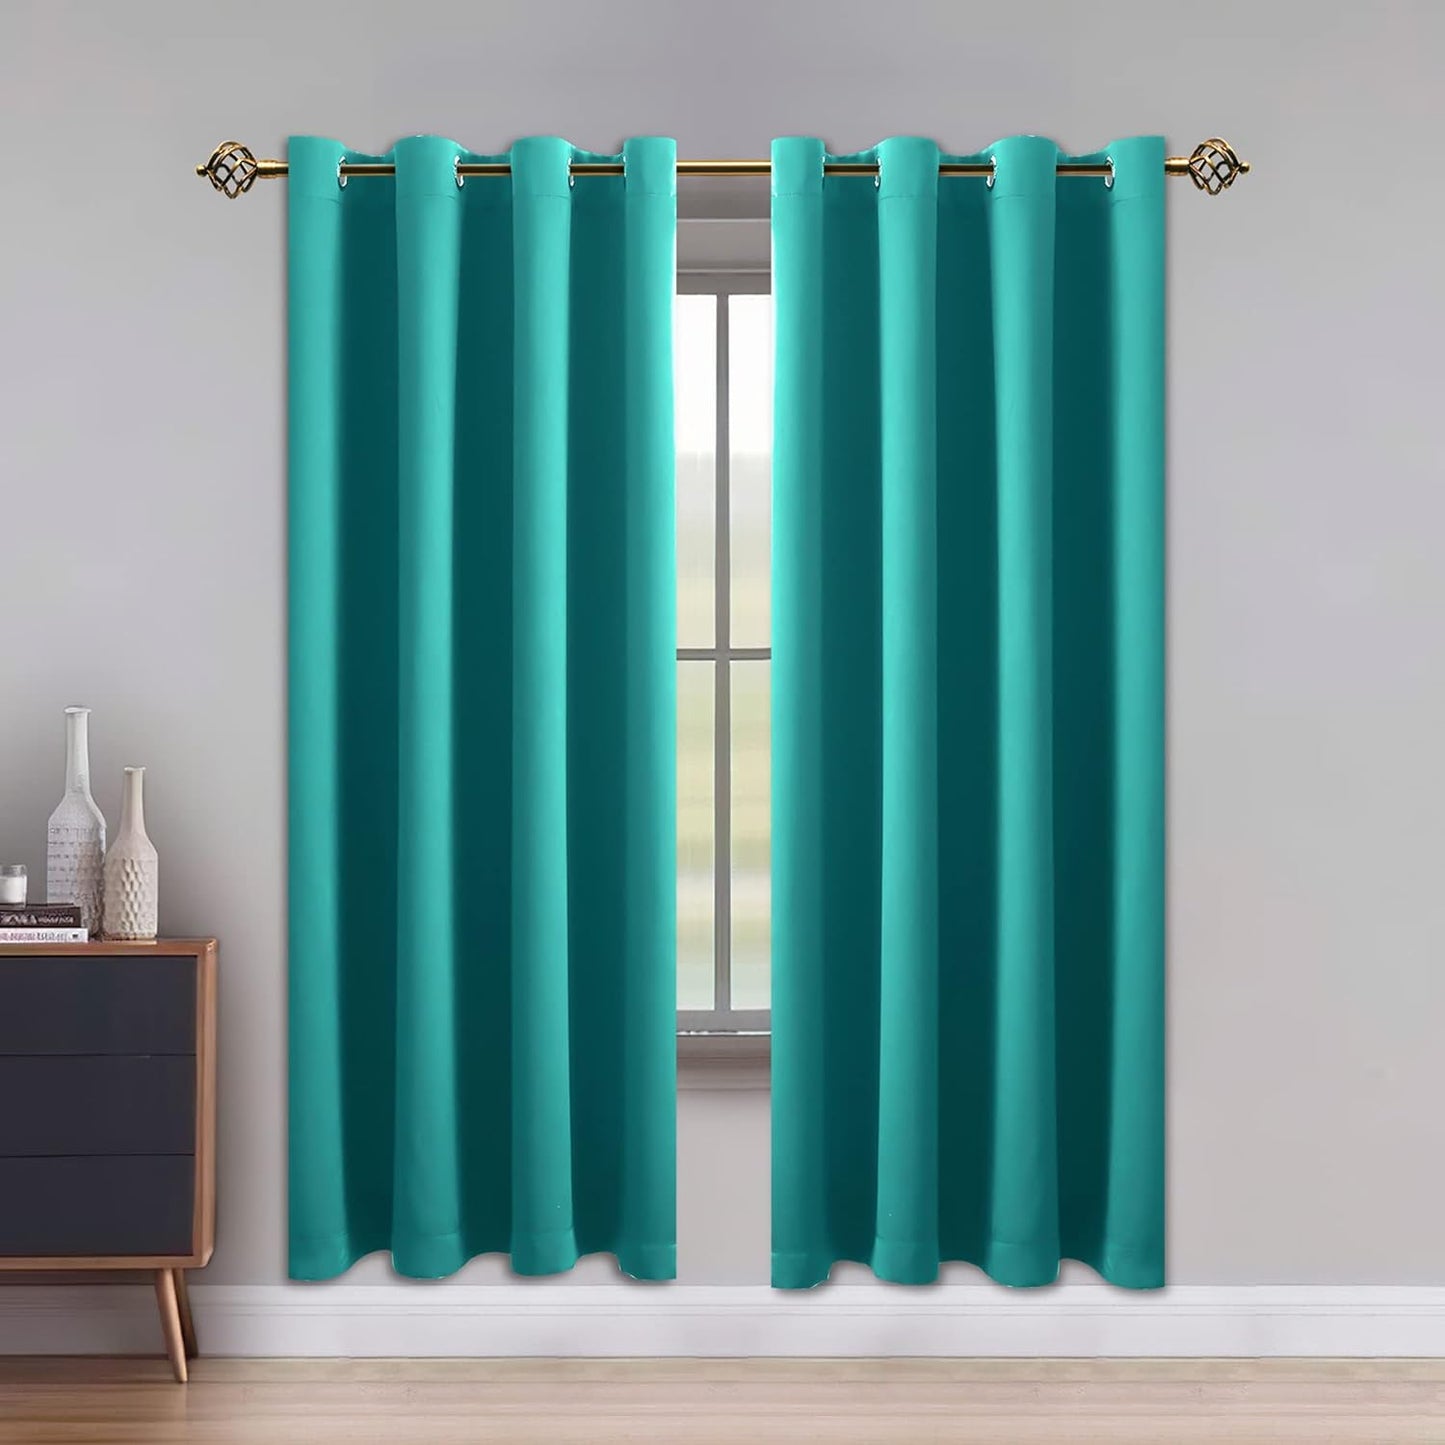 LUSHLEAF Blackout Curtains for Bedroom, Solid Thermal Insulated with Grommet Noise Reduction Window Drapes, Room Darkening Curtains for Living Room, 2 Panels, 52 X 63 Inch Grey  SHEEROOM Turquoise 42 X 84 Inch 